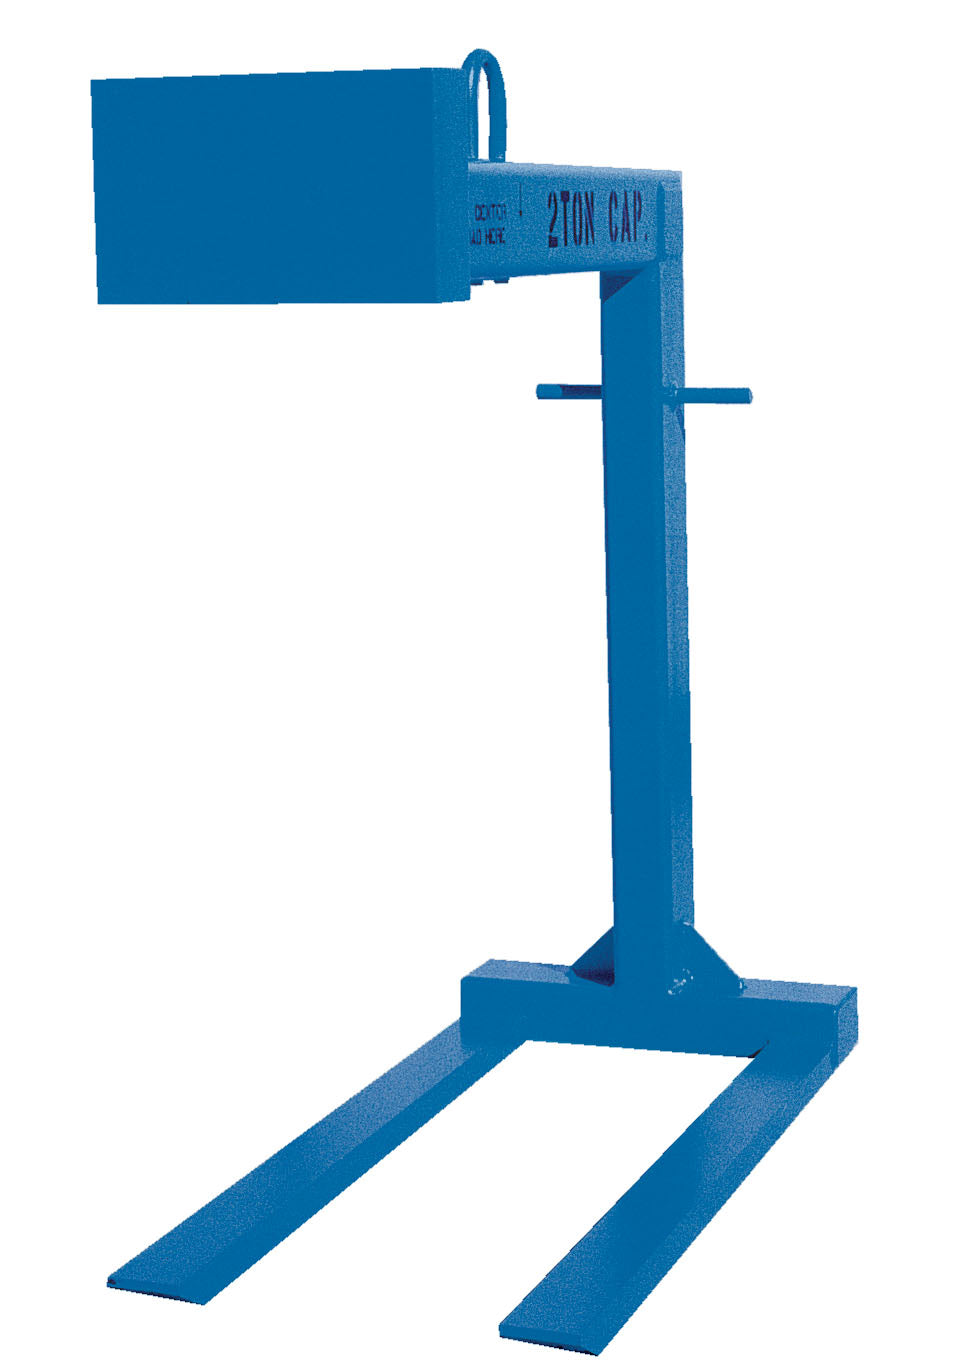 42" Pallet Lifter w/ 2,000-lbs Capacity